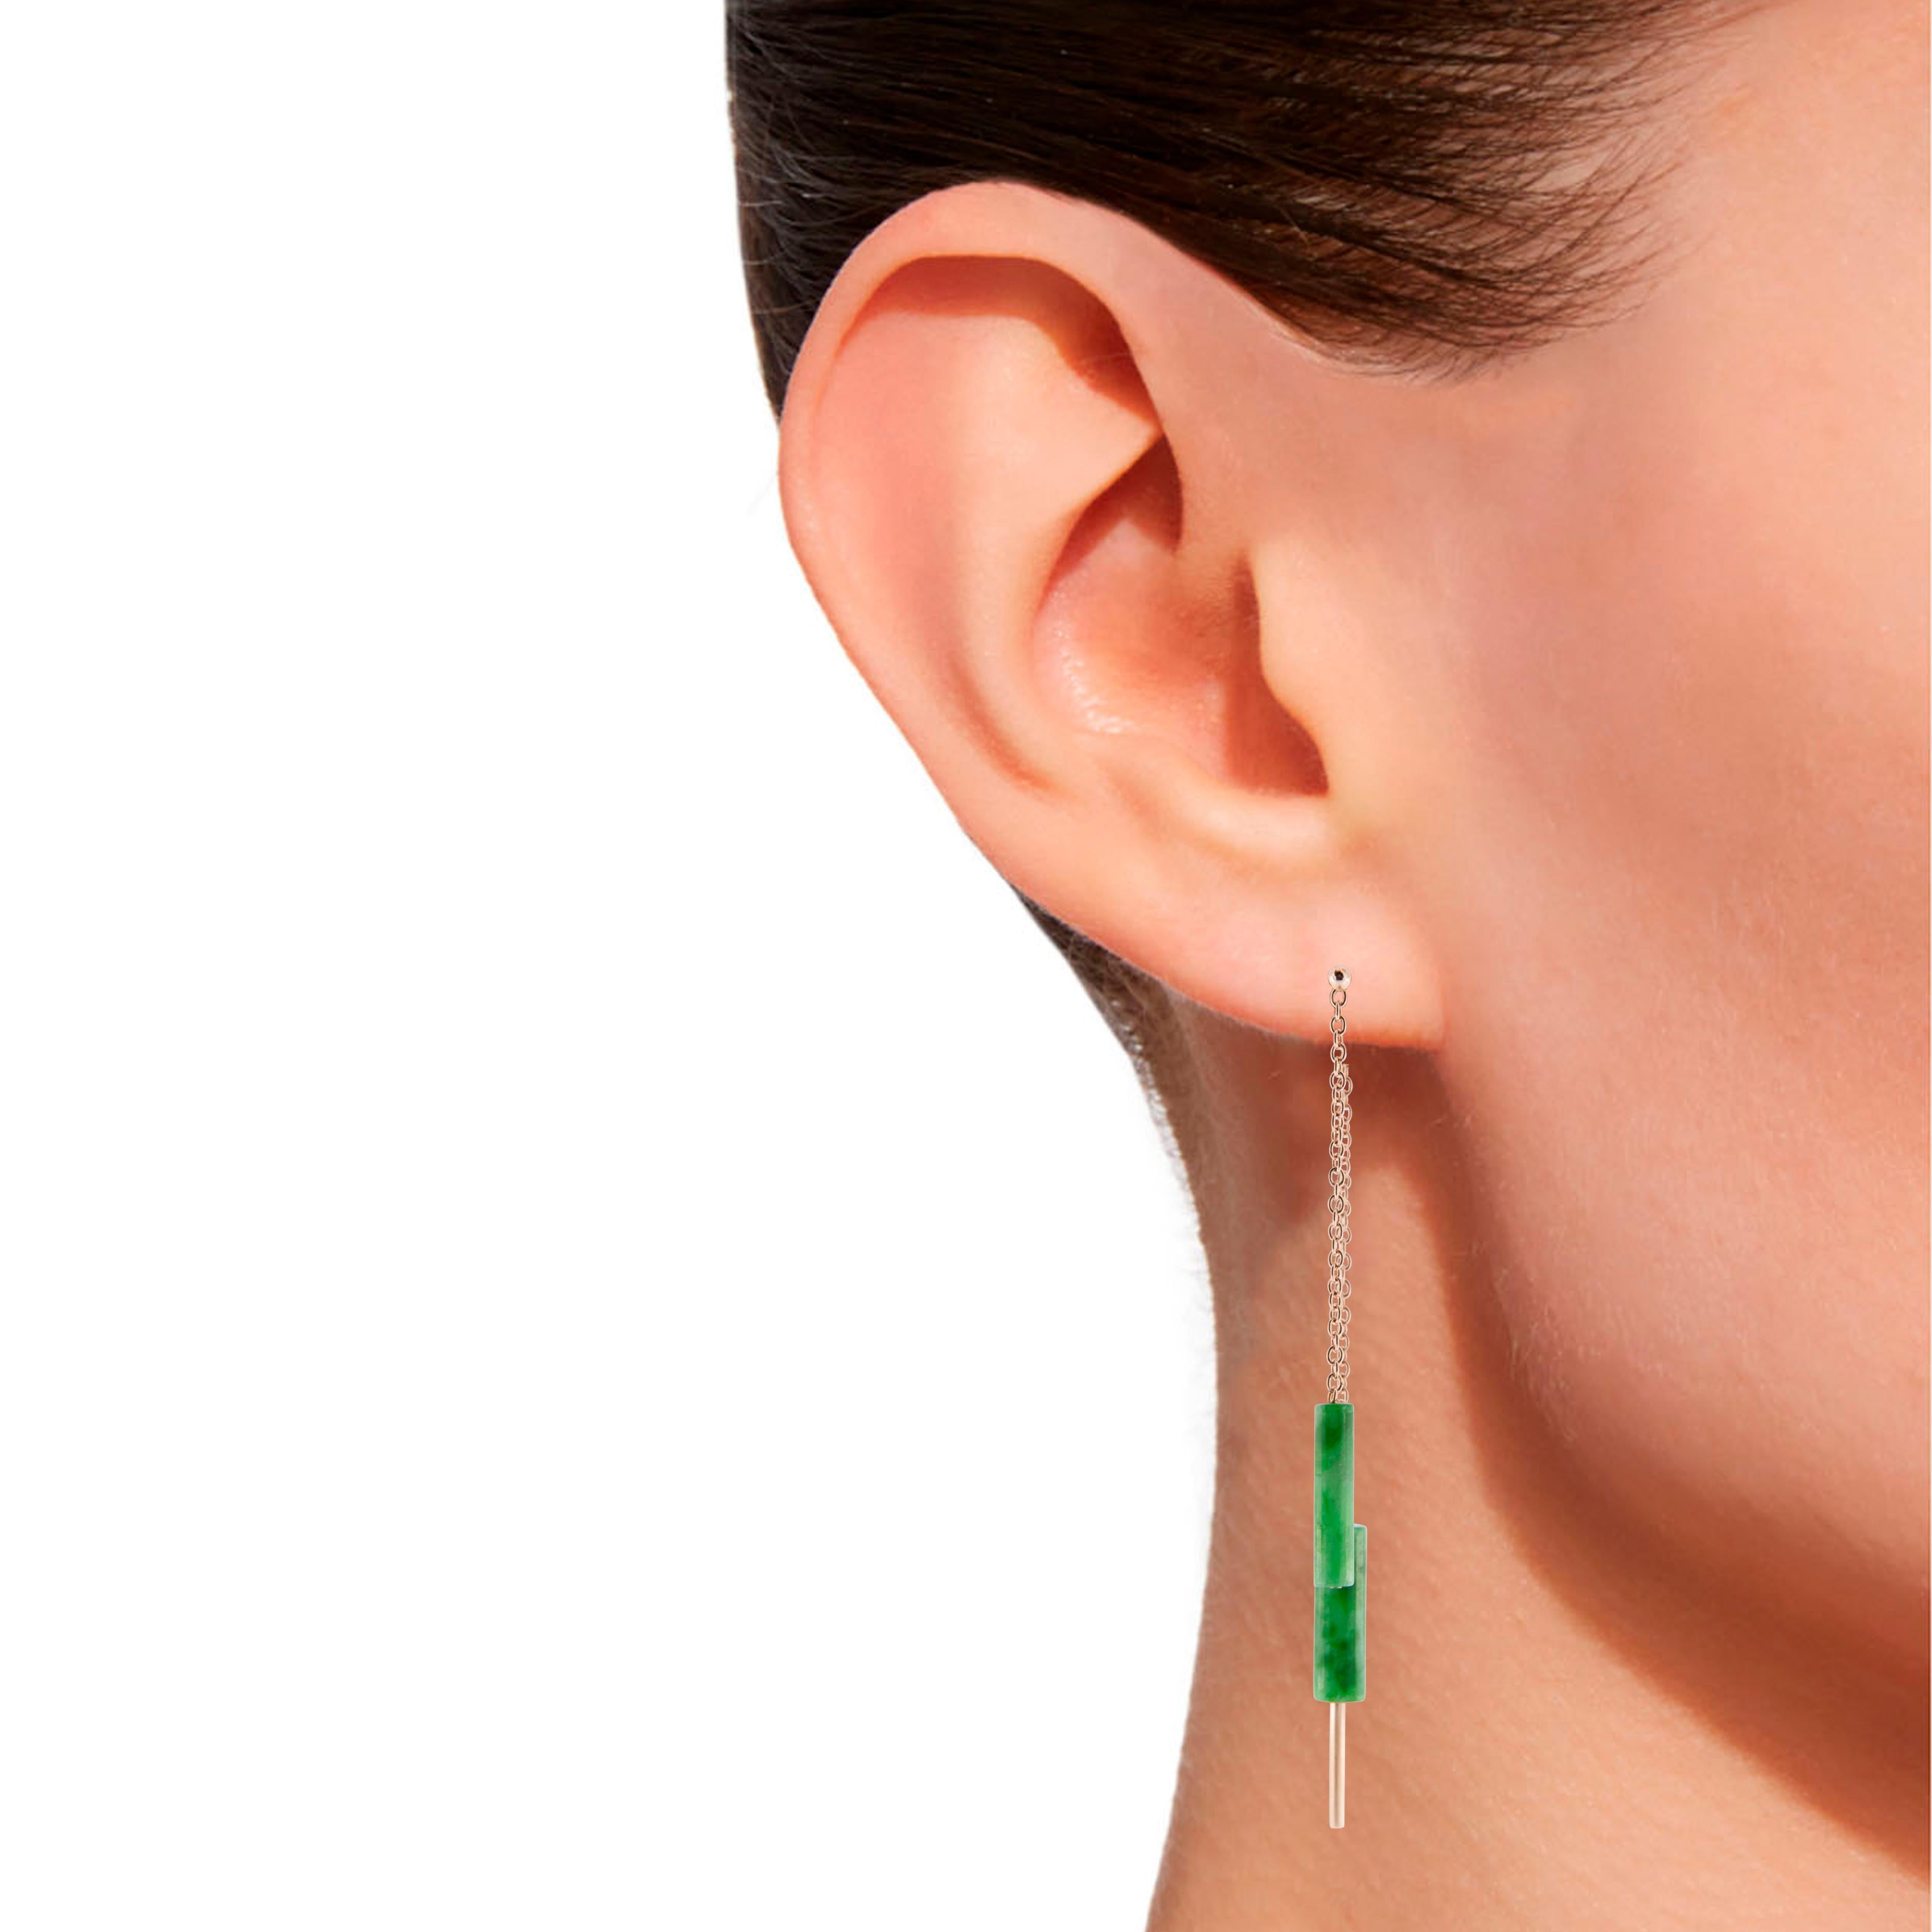 Jona design collection, hand crafted in Italy, 18 karat rose gold earrings suspending two Burmese Jade cylinders.
Dimensions : lenght 2.42 in / 6.15 cm - Stone Diameter : from 0.11 in / 2.95 mm  to  0.15 in / 3.96 mm
Lenght: from 0.44 in / 11.33 mm